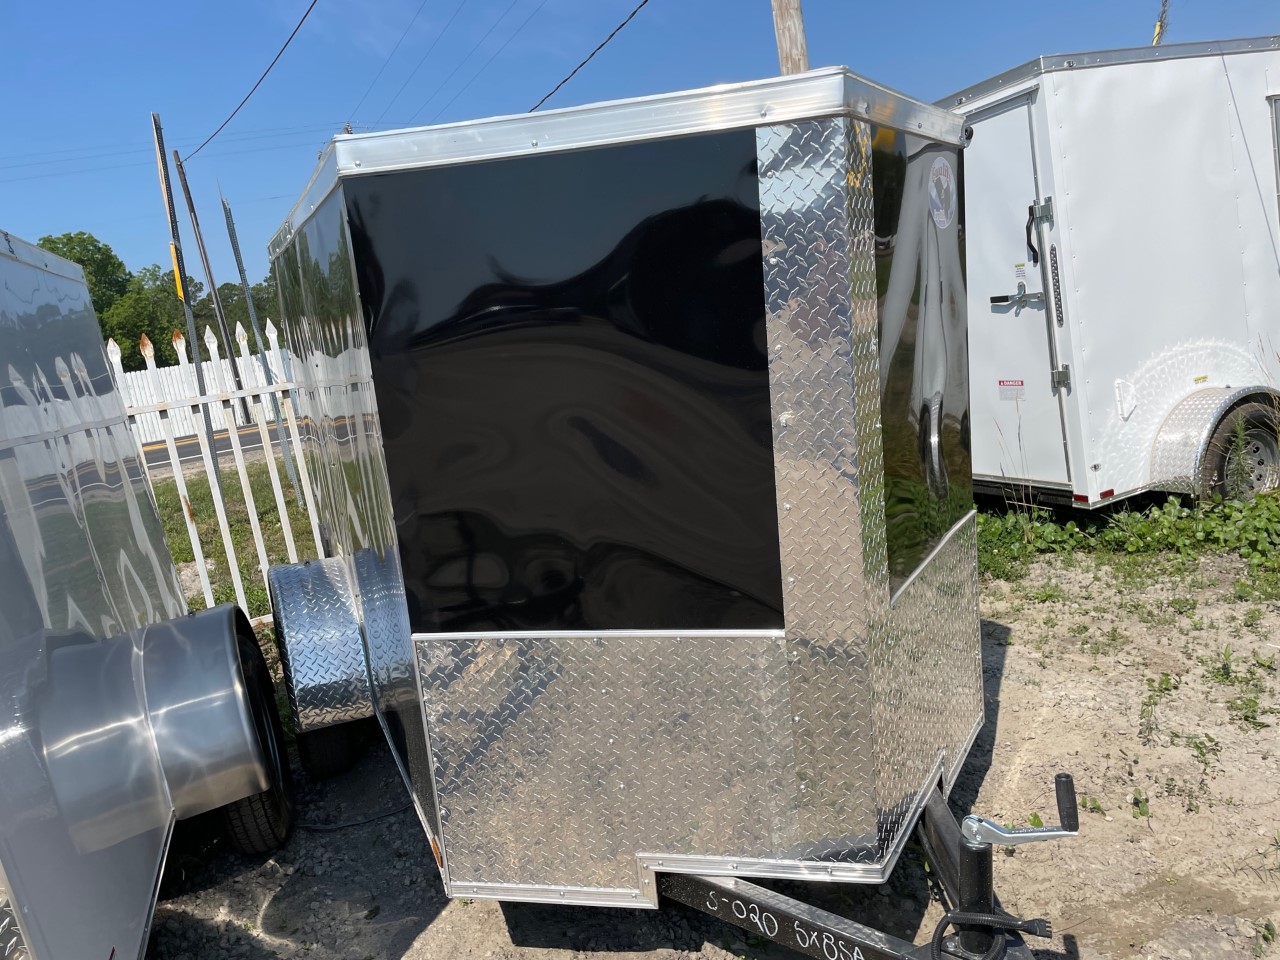 Creating a Mobile Boutique Out of a 6x10 Cargo Trailer